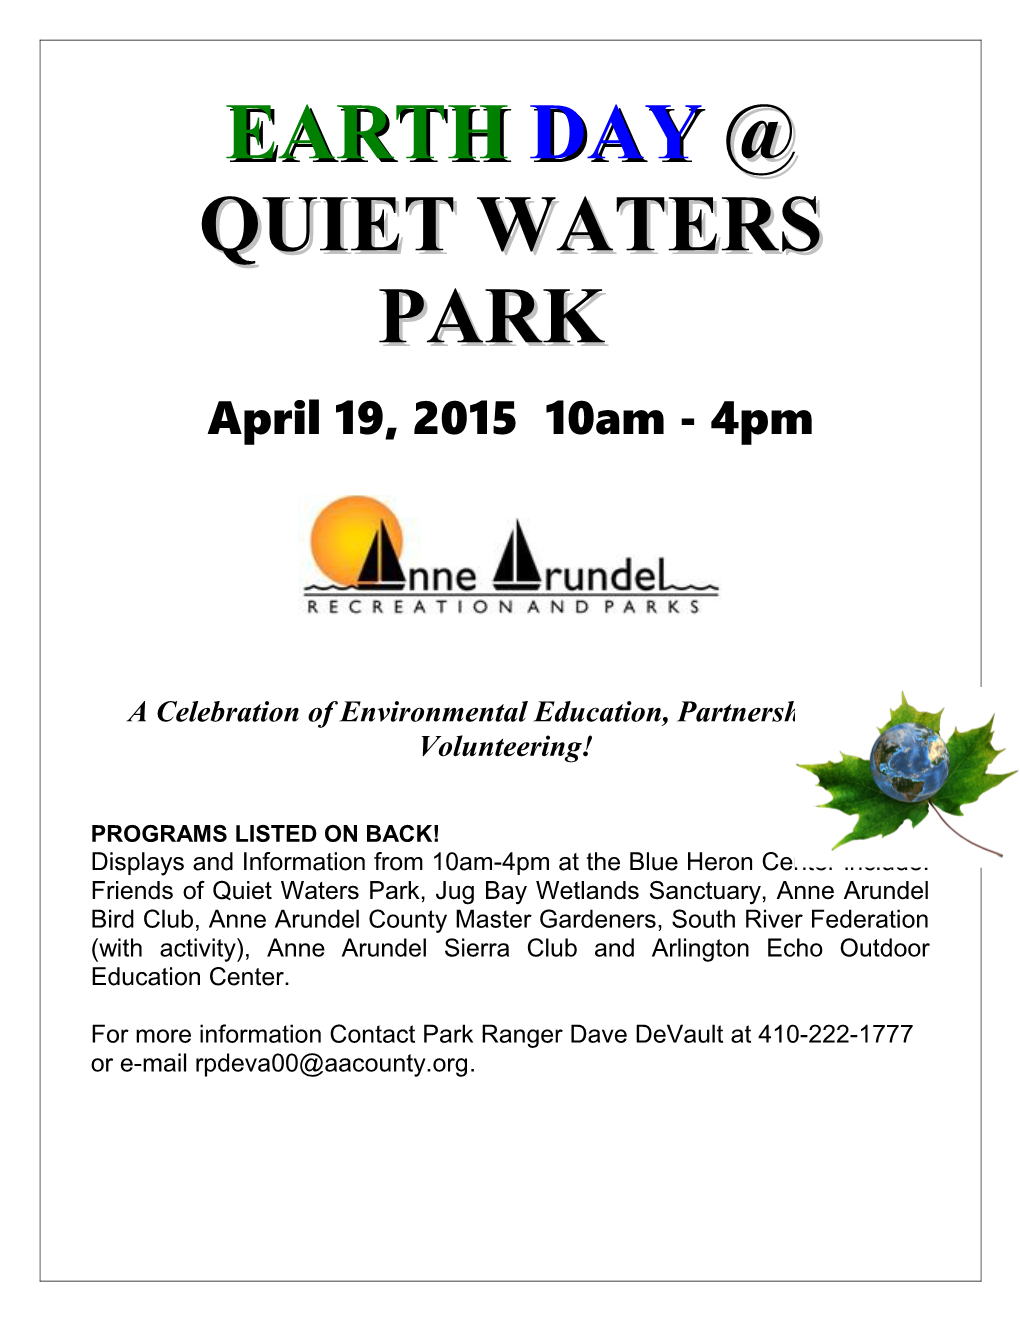 Earth Day Quiet Waters Park